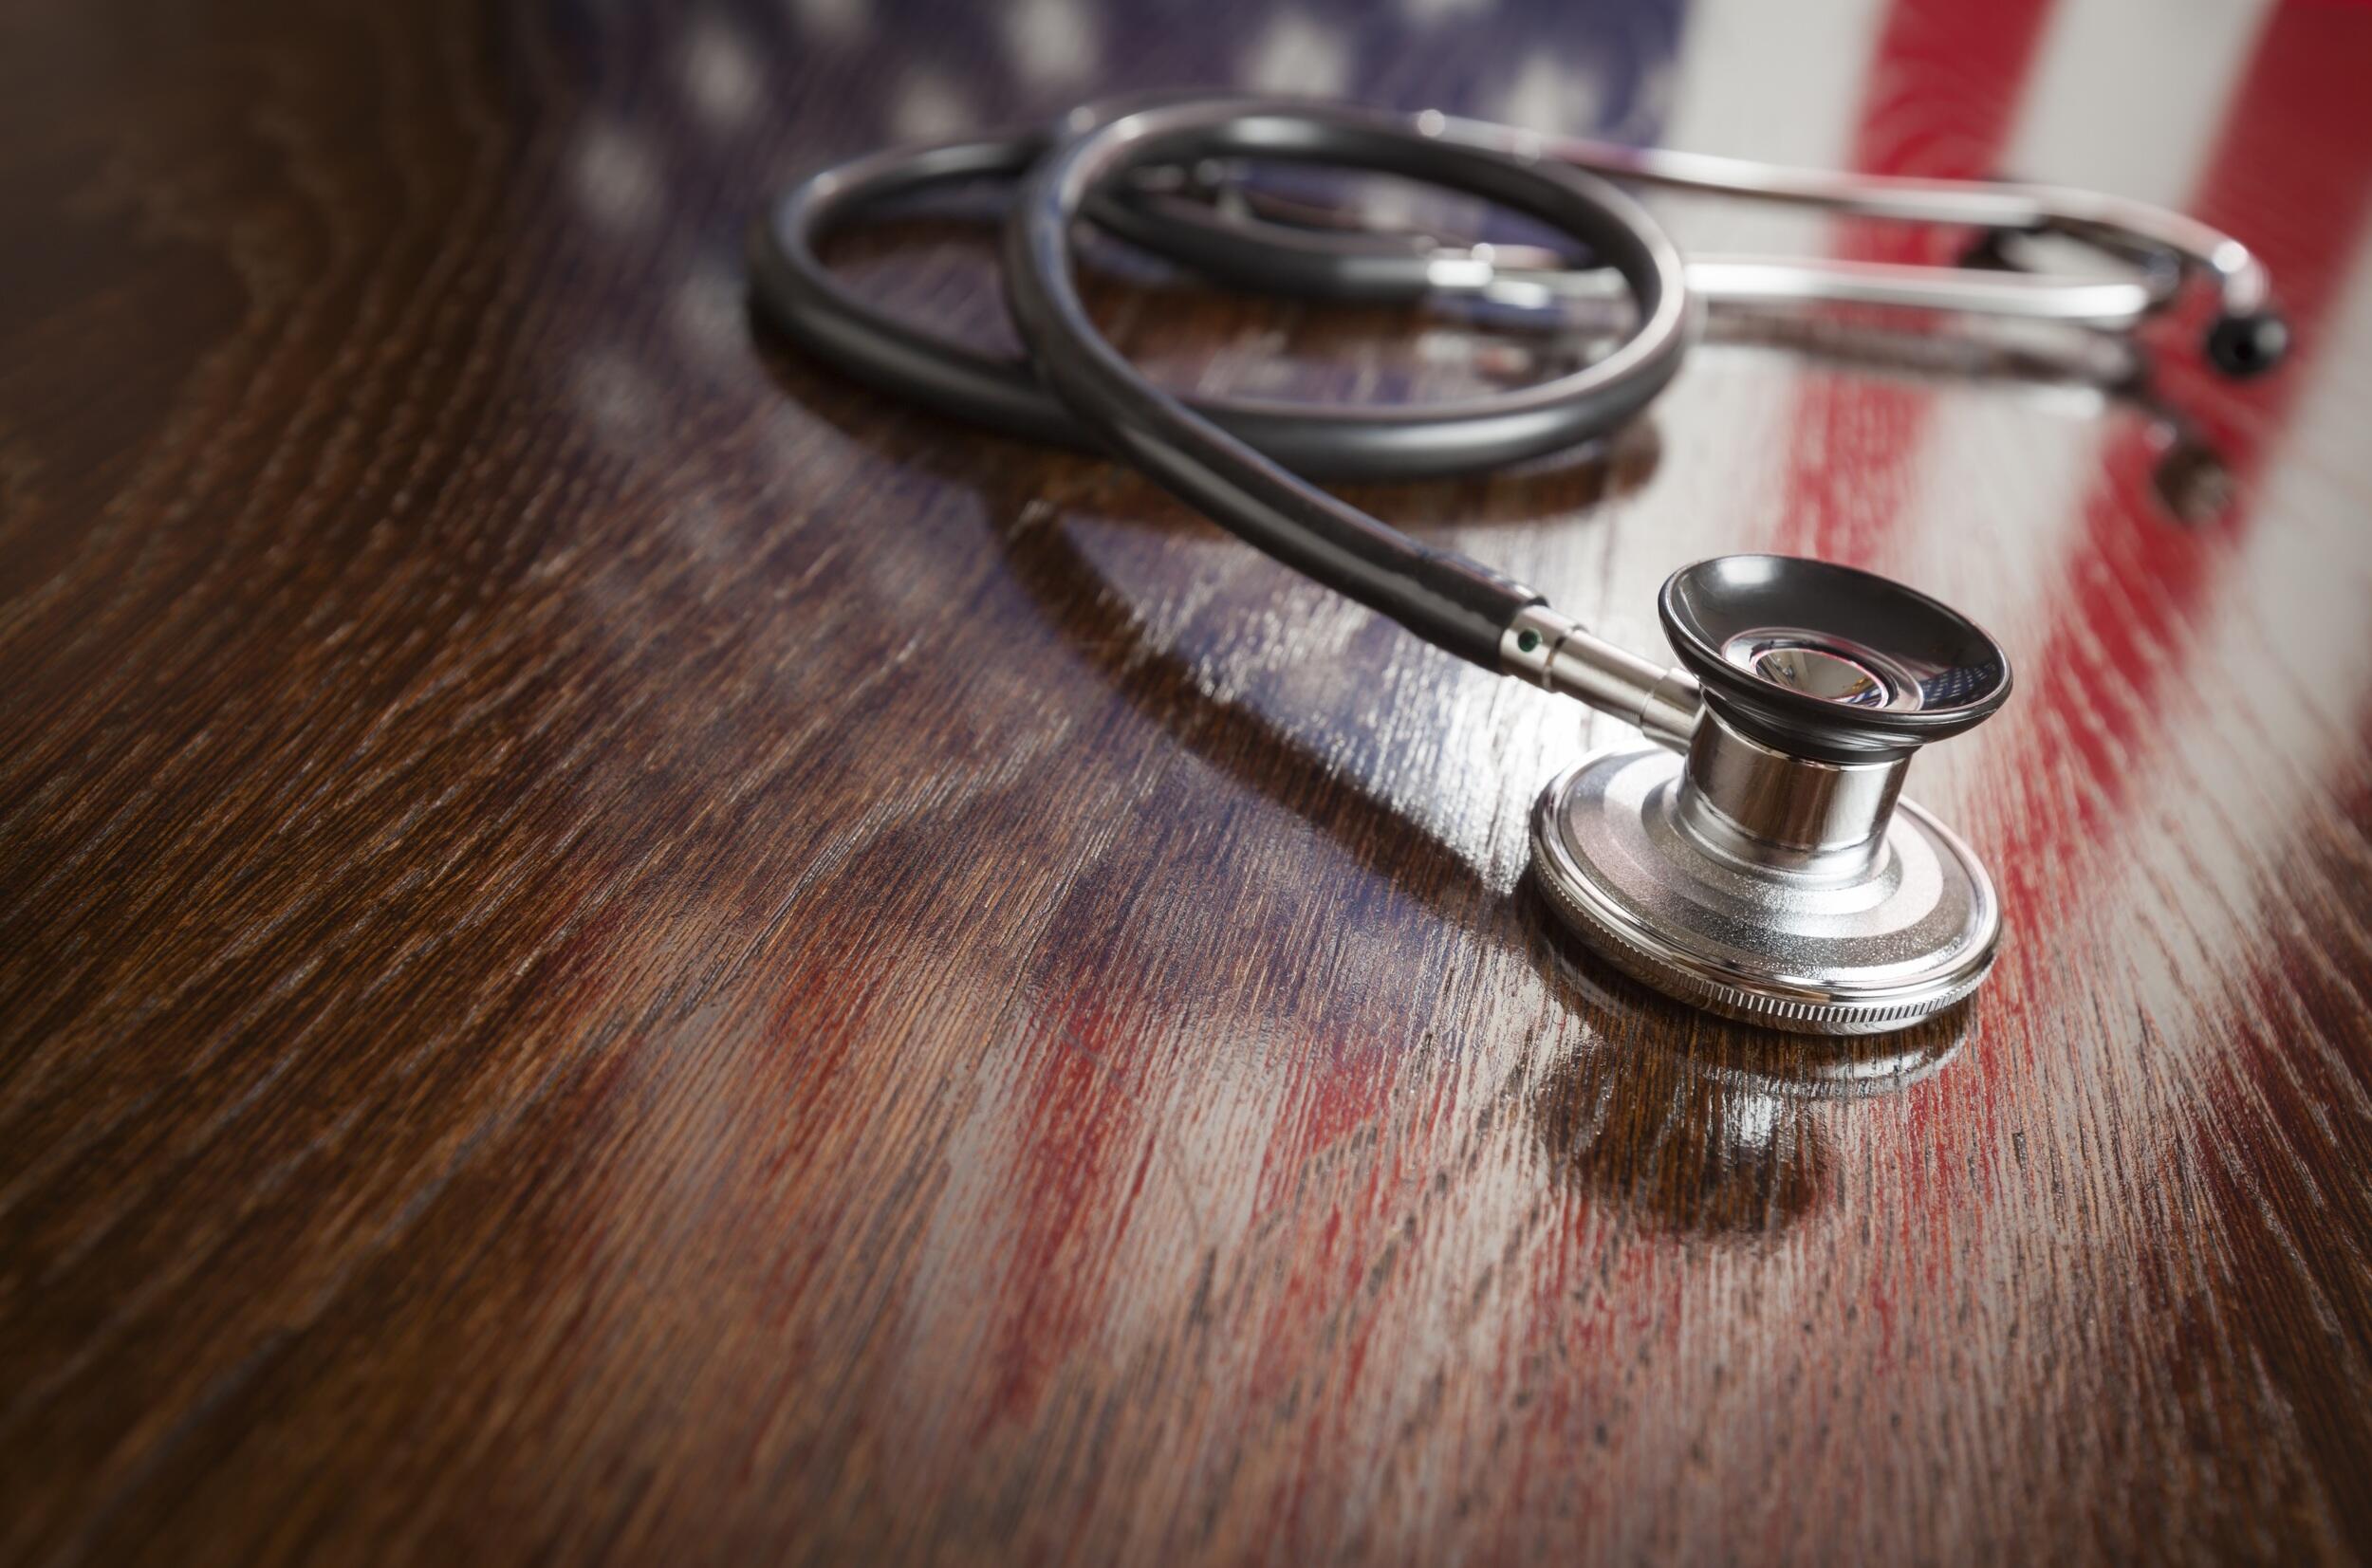 A stethoscope sitting on a wood table with an American Flag